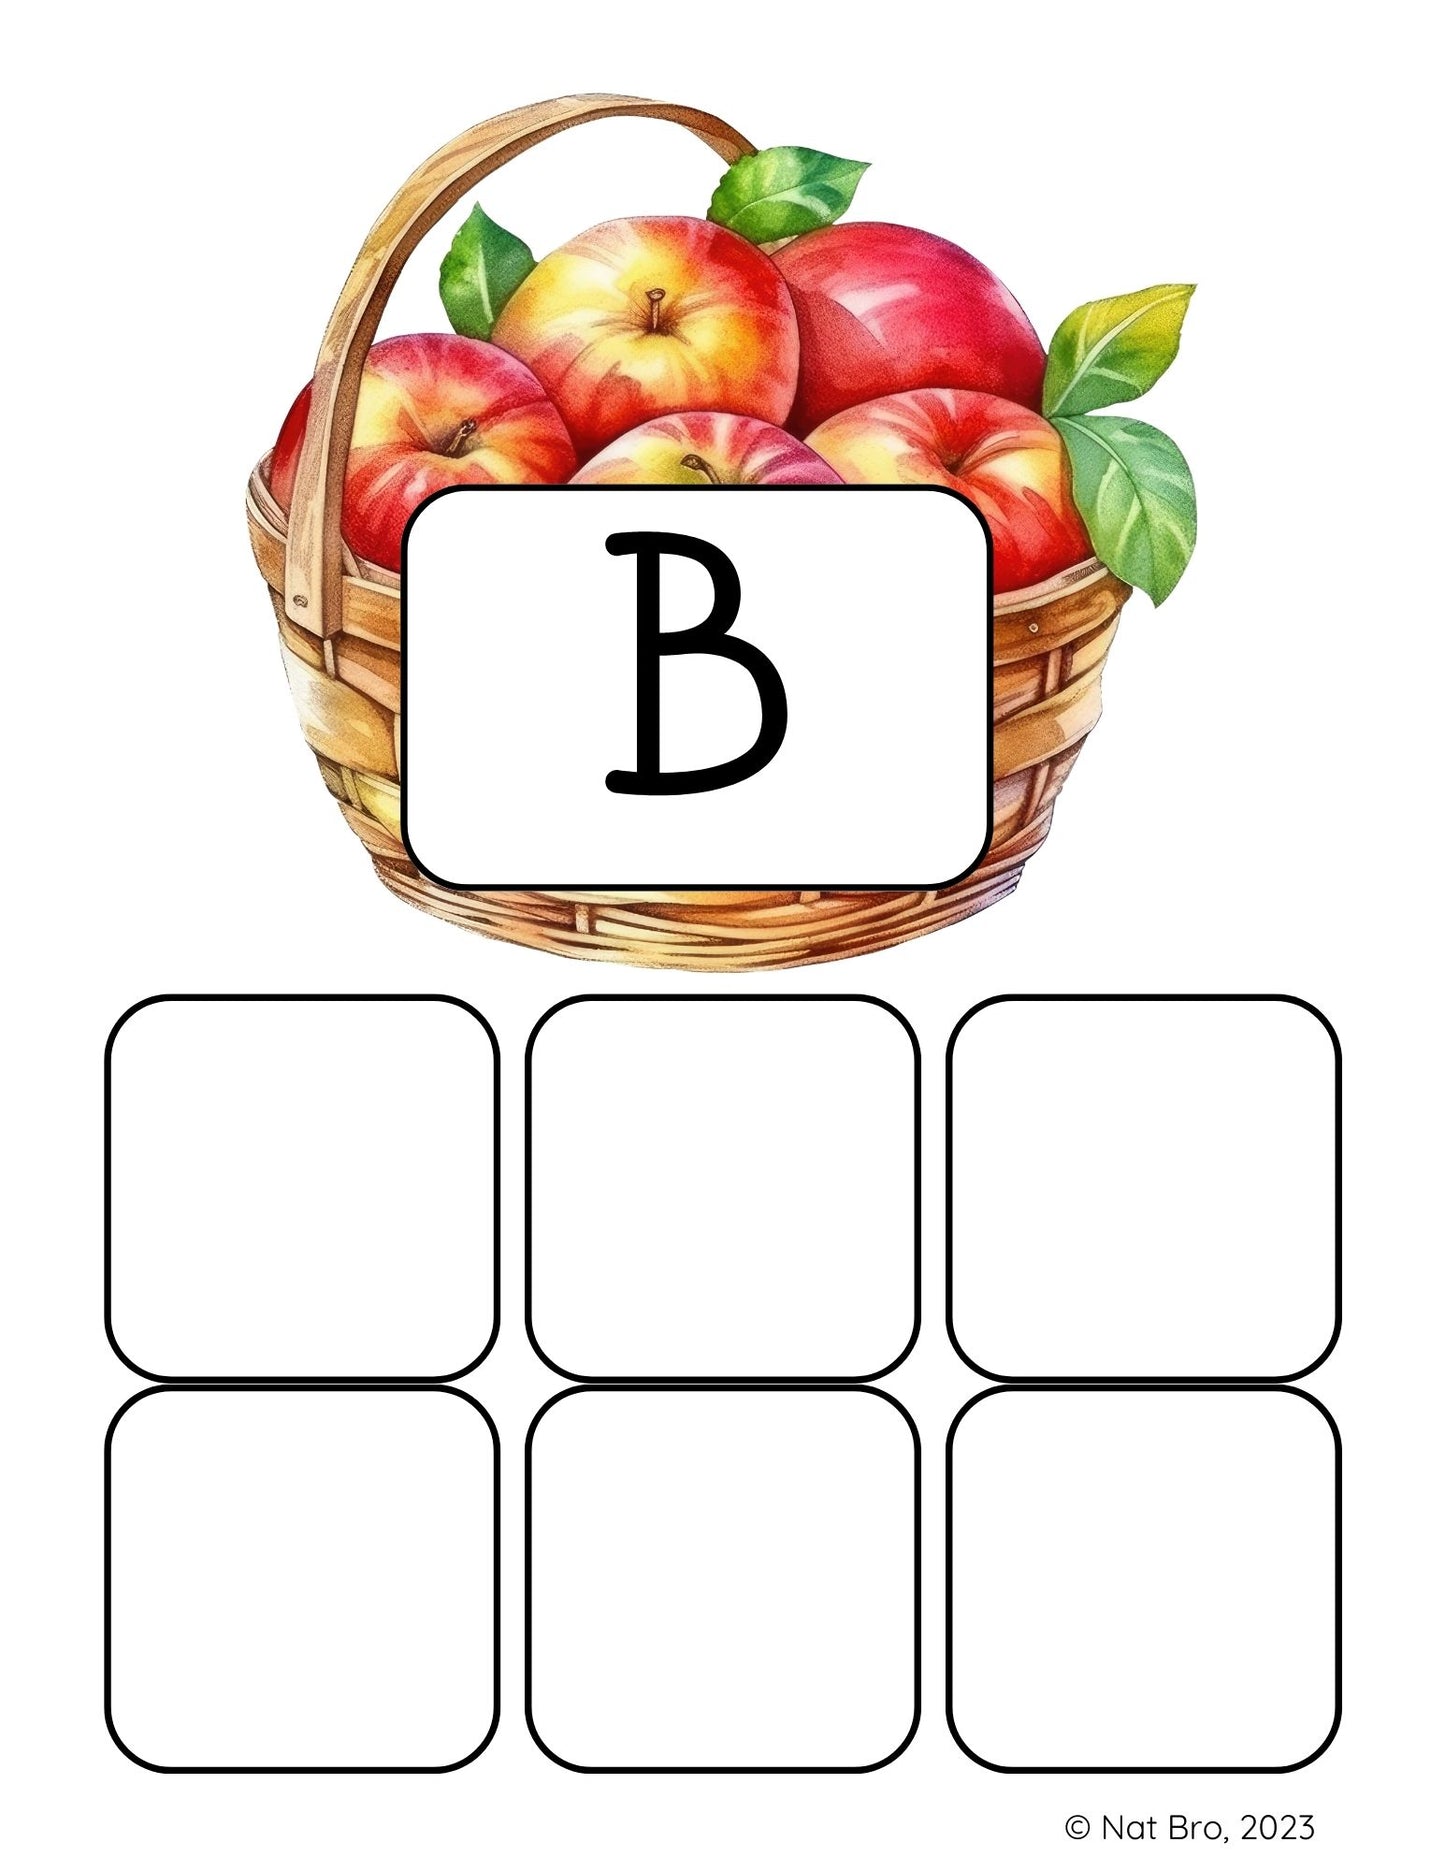 Picture/Letter Matching Game for Pre-K